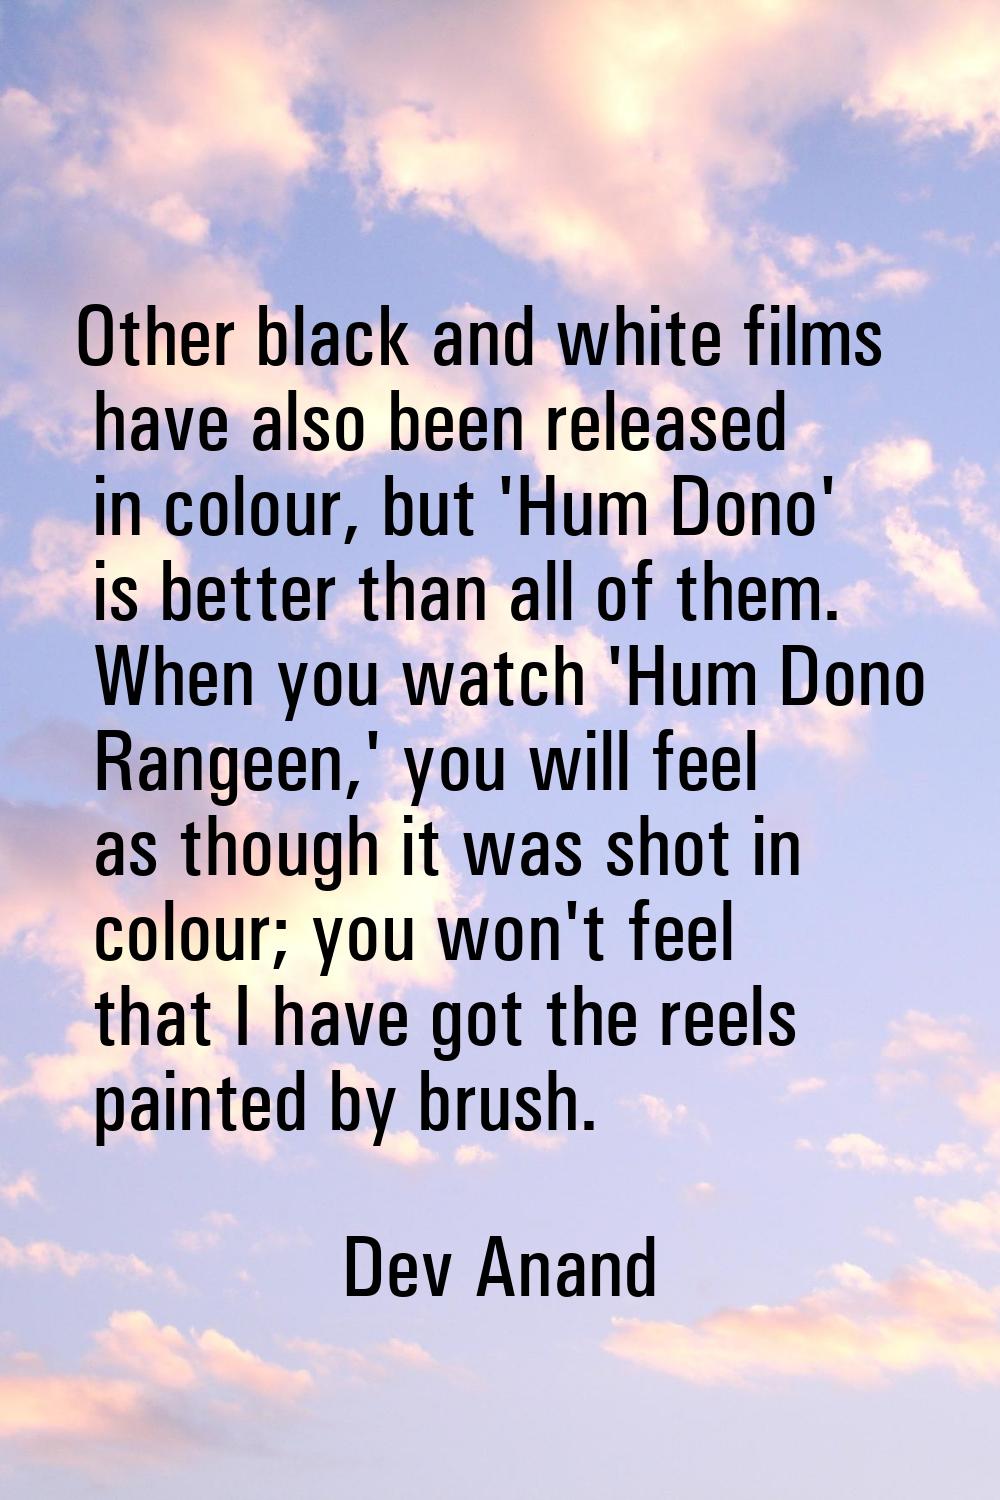 Other black and white films have also been released in colour, but 'Hum Dono' is better than all of